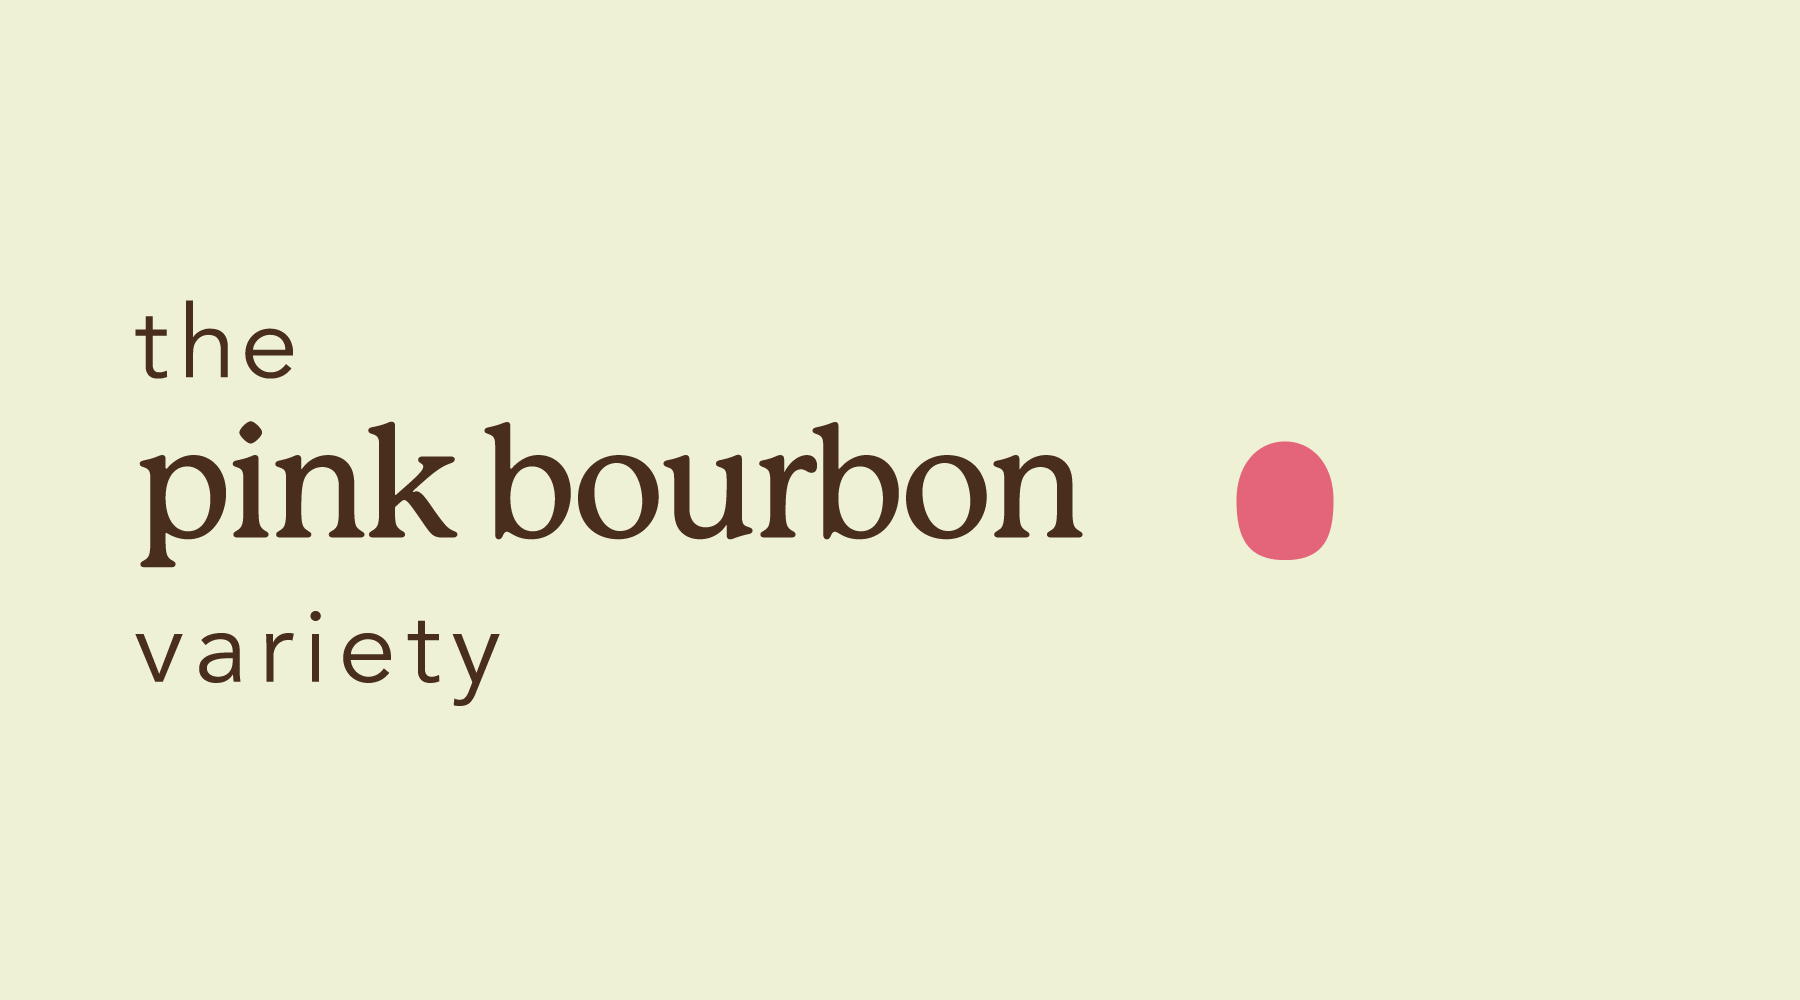 Text of graphic for Sagebrush coffee educational blog saying "the pink bourbon variety"